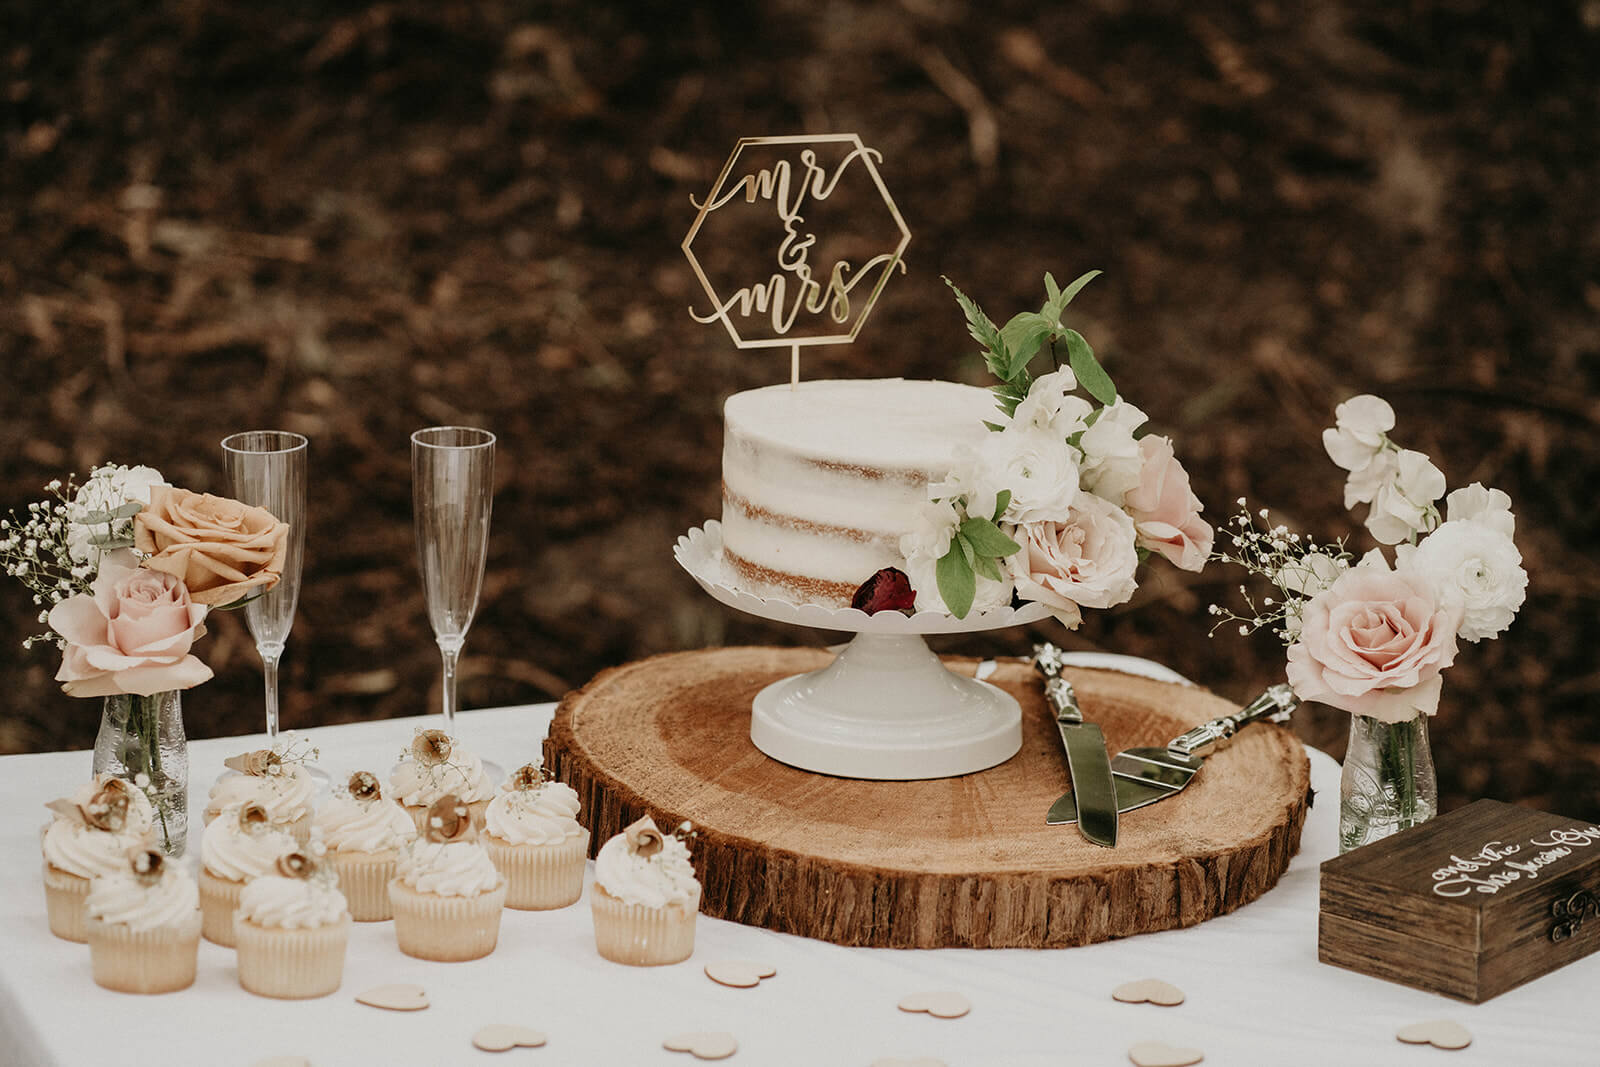 White wedding cake and cupcakes at forest elopement